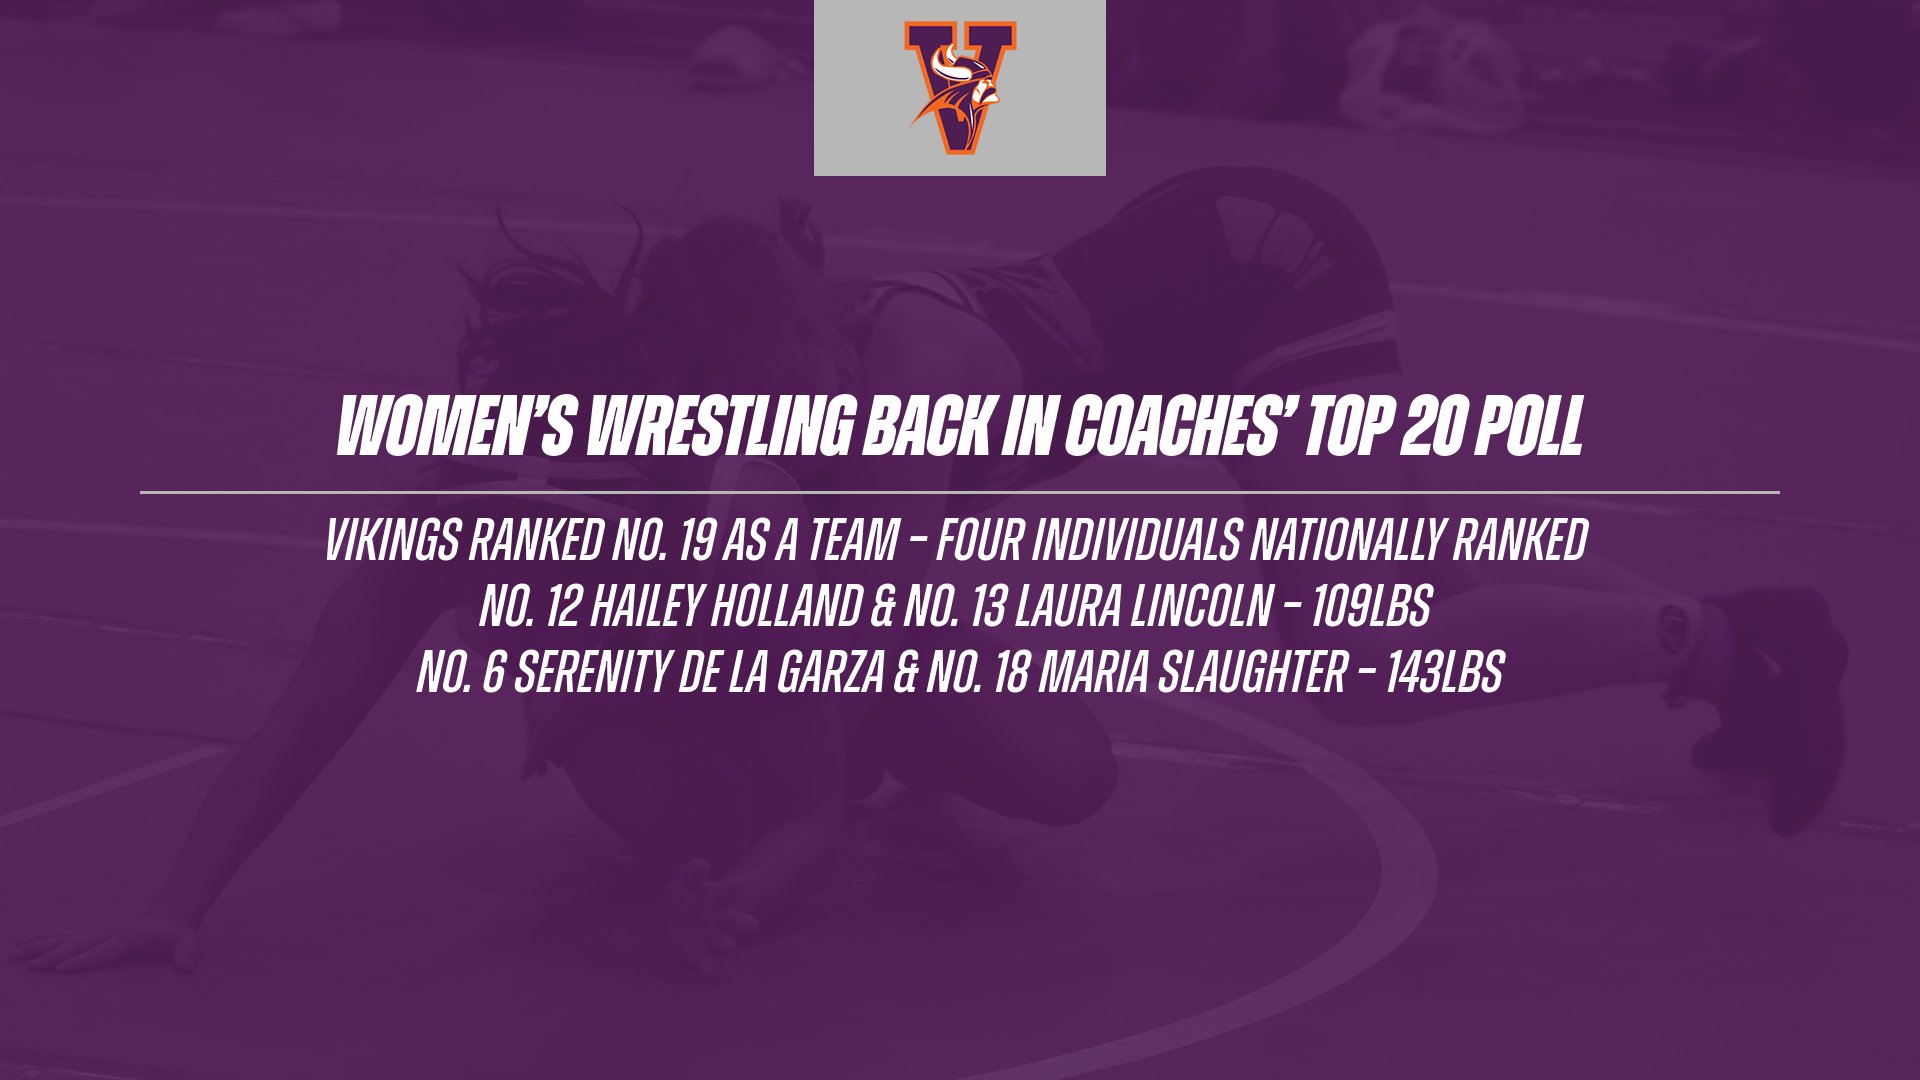 Women's Wrestling Back in Coaches' Poll Top 20, Four Individuals Ranked